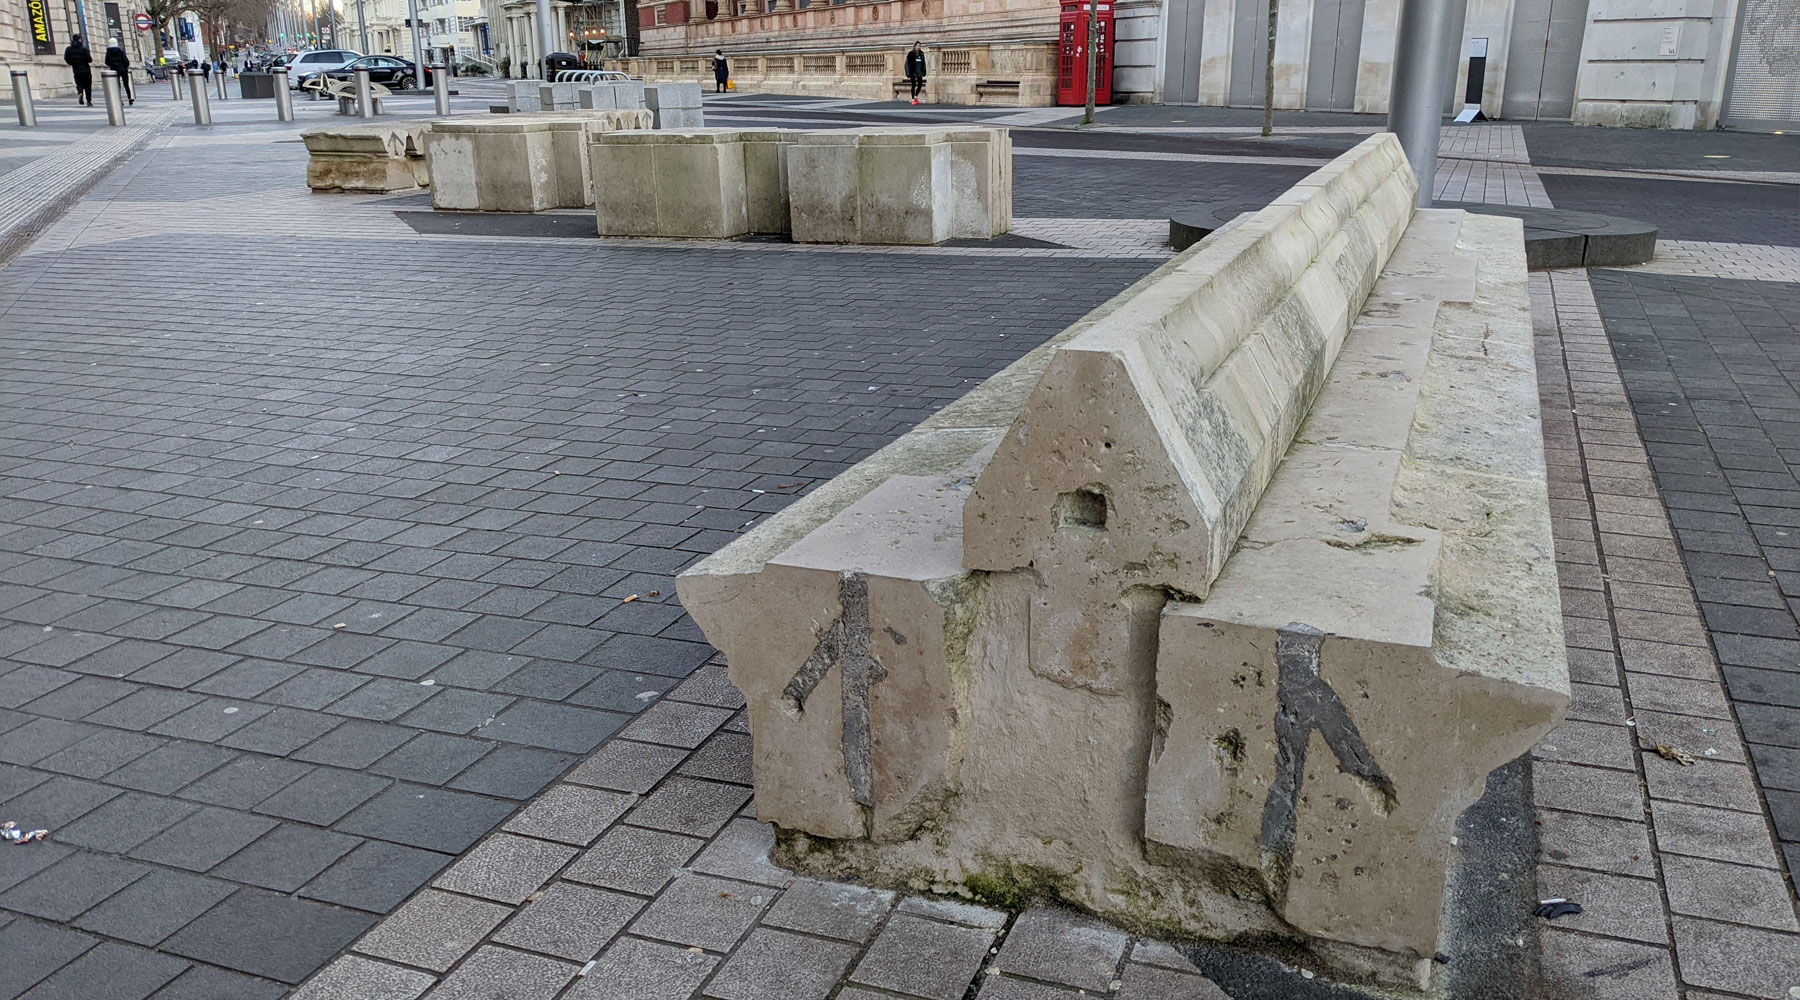 An unexpected history in the stone benches outside Kensington's museums